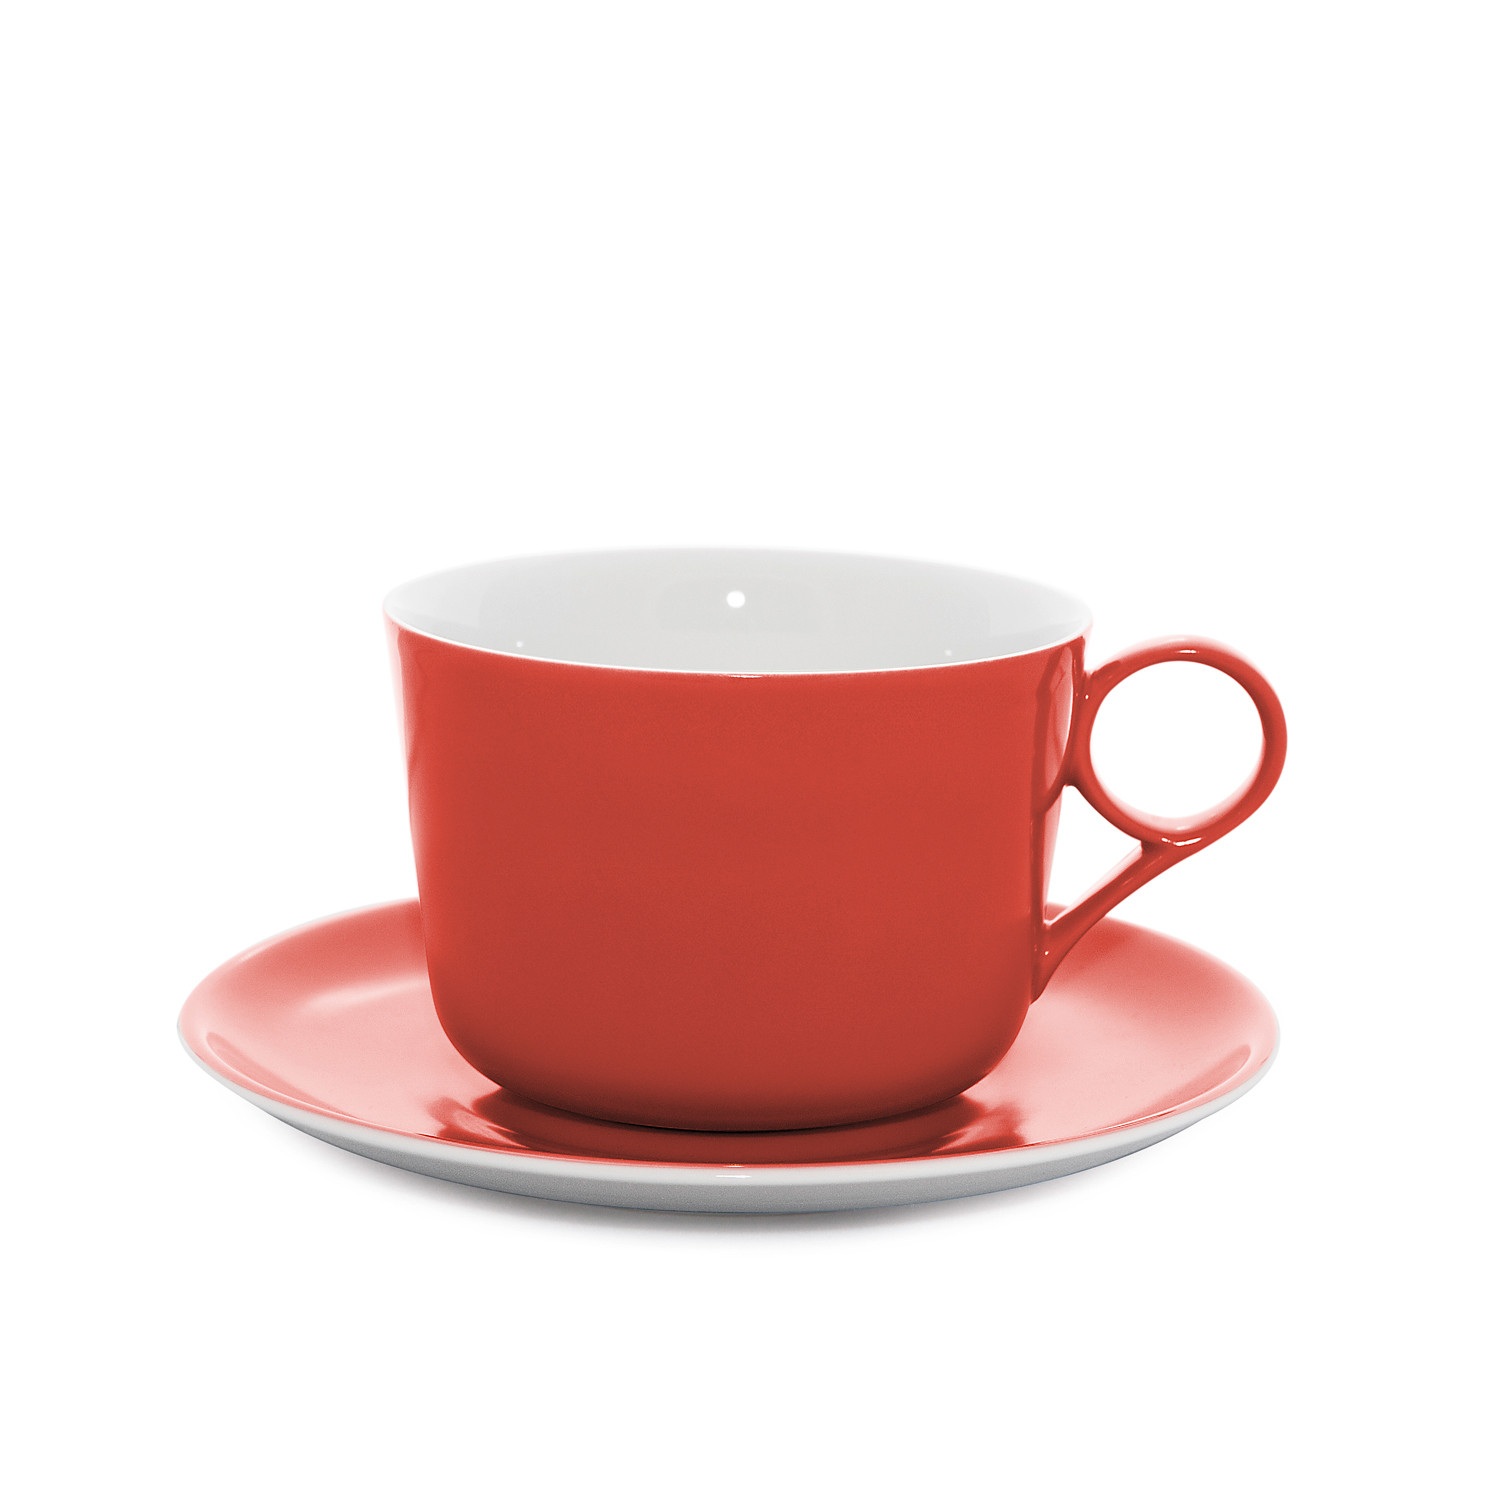 Me Coffee Cup // Red (Small, 6.6 oz) - LADP - Touch of Modern